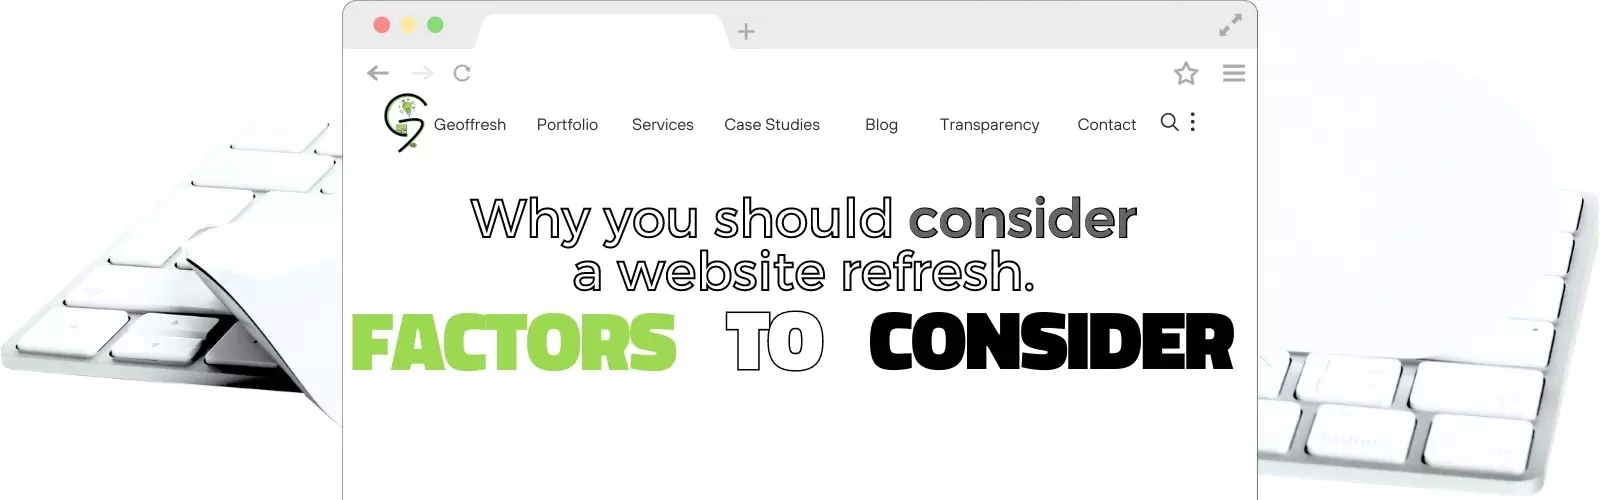 Factors to Consider Before Refreshing Your Website